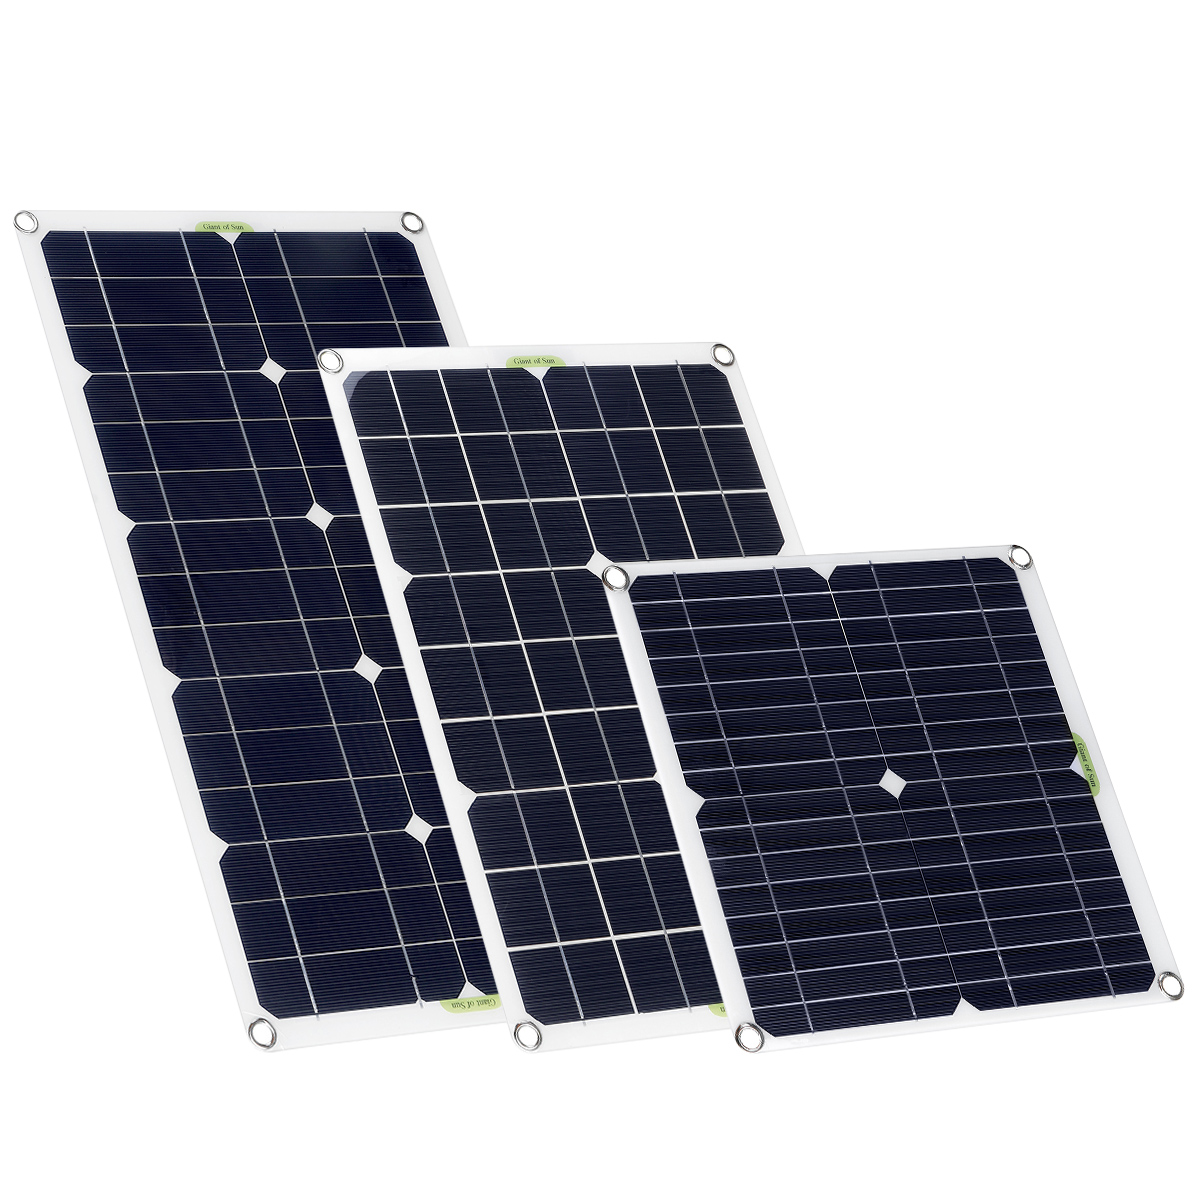 50W-Solar-Panel-Kit-18V-Battery-Charger-1020304050A-Controller-DCUSBTYPE-C-For-Outdoor-Camping-Acces-1780843-4